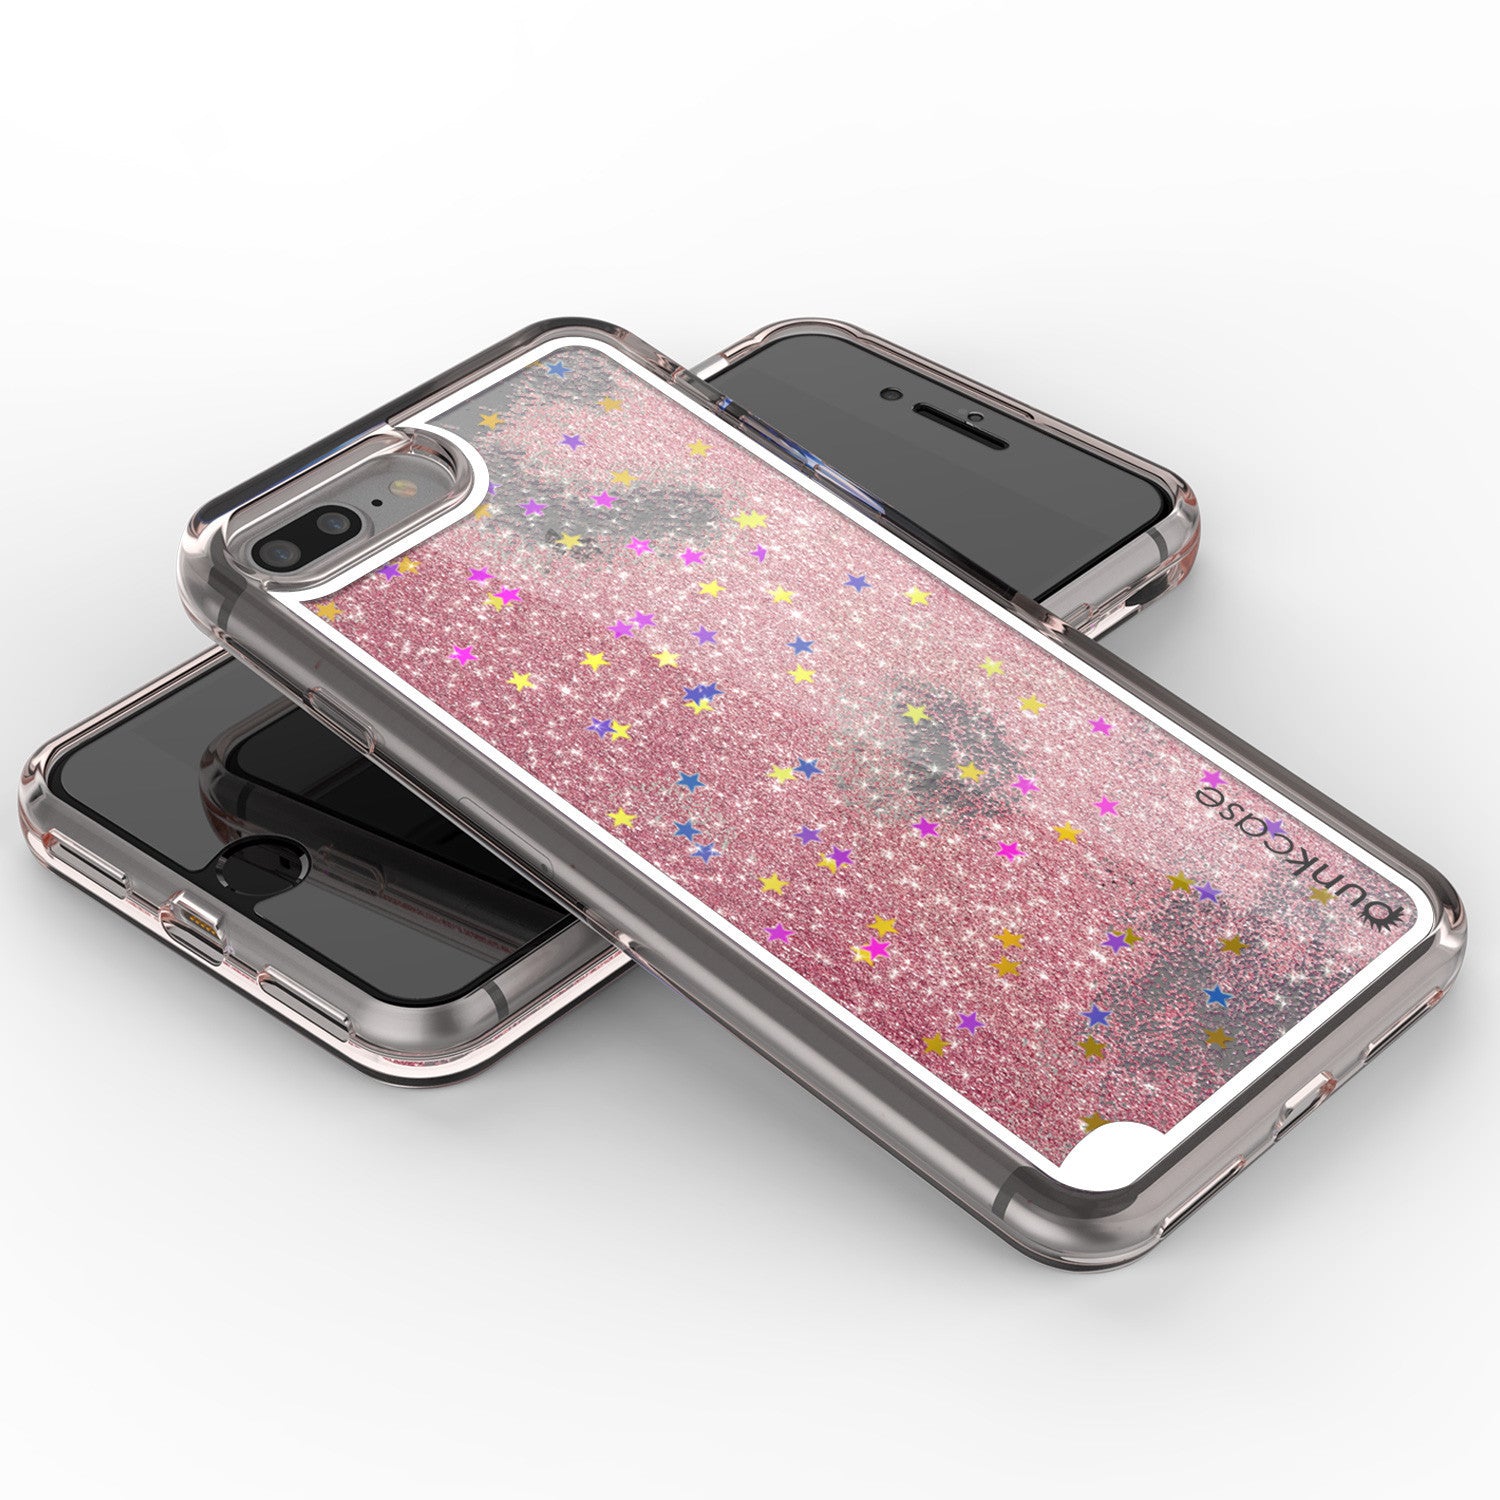 iPhone 7 Plus Case, PunkCase LIQUID Rose Series, Protective Dual Layer Floating Glitter Cover